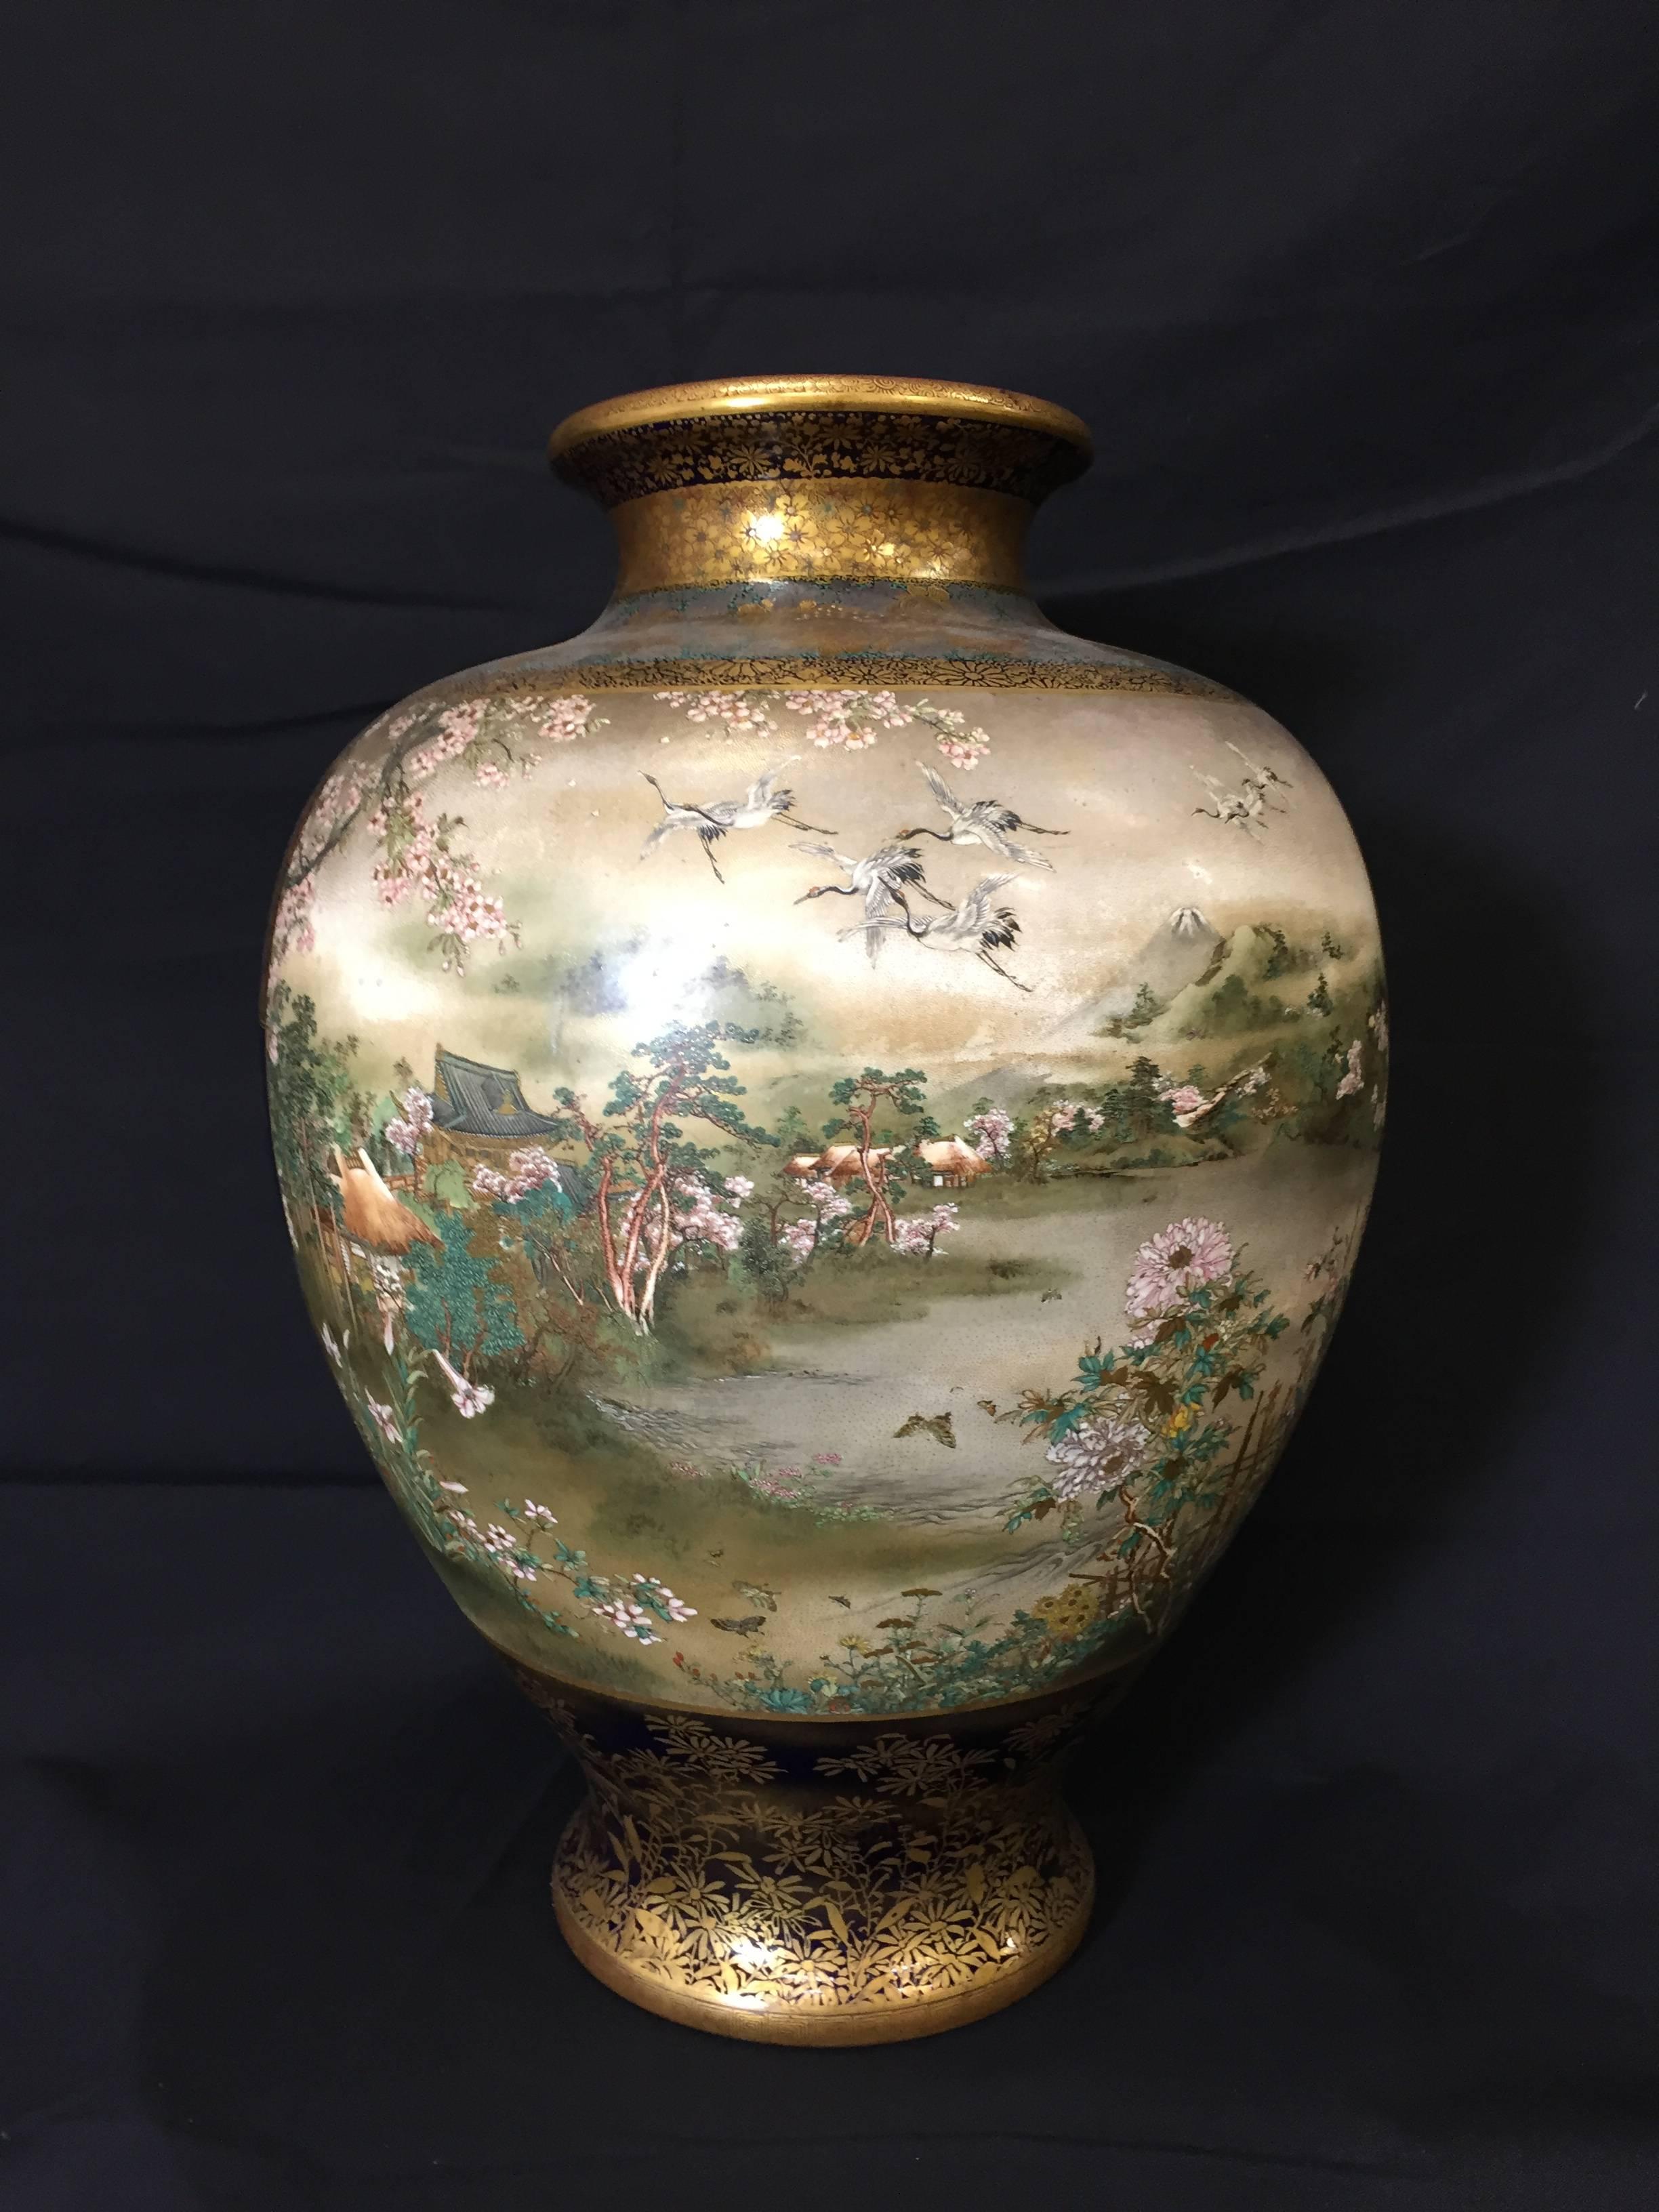 A very fine quality Japanese Satsuma vase by Kinkozan zo. Meiji period late 19th Century.
Decorated in various coloured enamels and gilt, the two panels depicting ladies and children amongst trees and flowers, bordered by cherry blossoms and maple